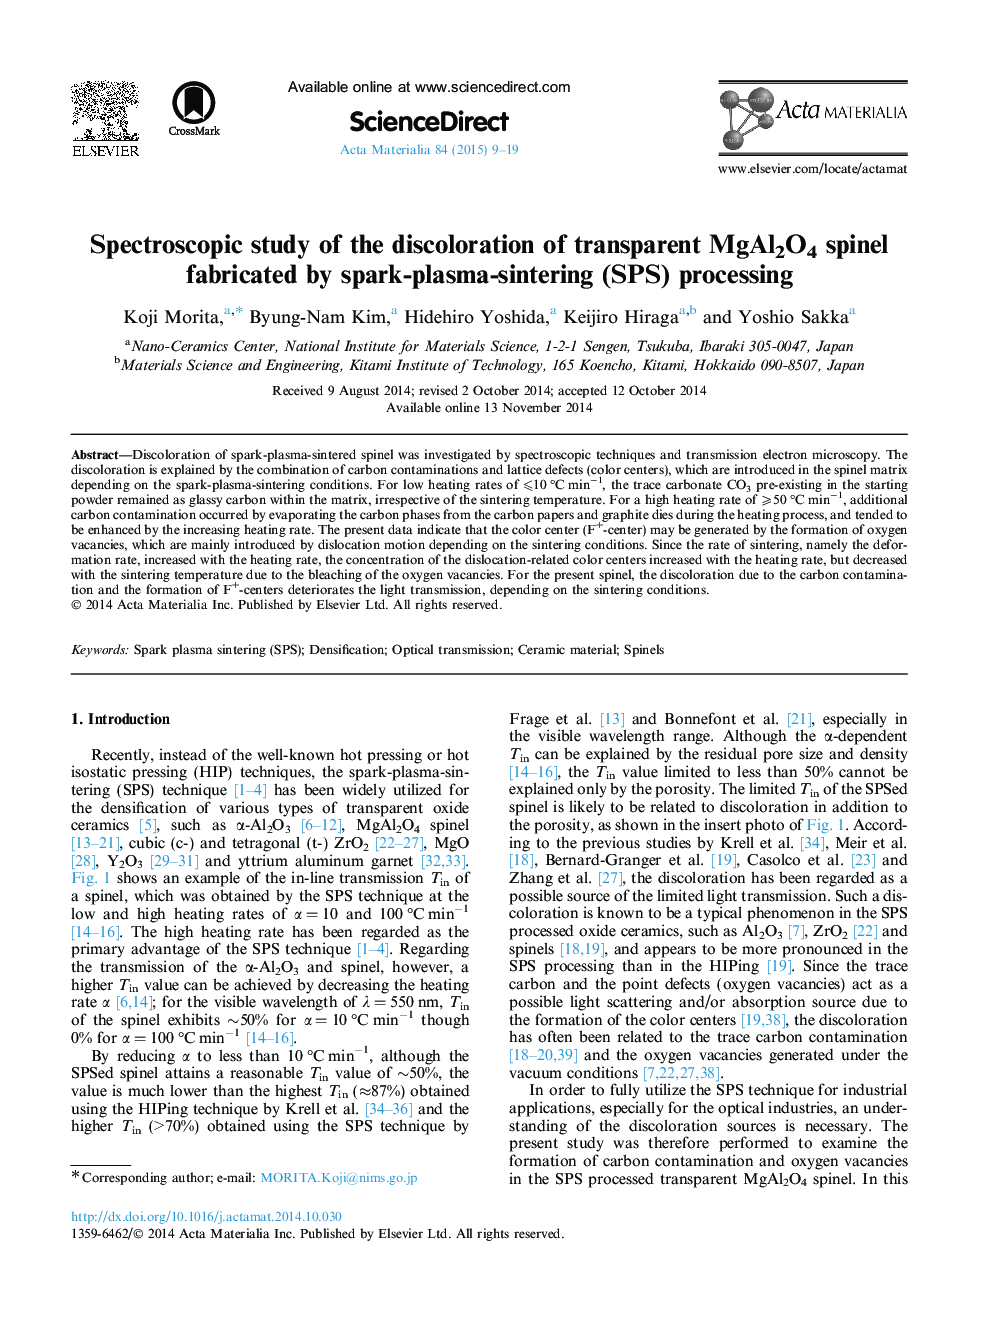 Spectroscopic study of the discoloration of transparent MgAl2O4 spinel fabricated by spark-plasma-sintering (SPS) processing